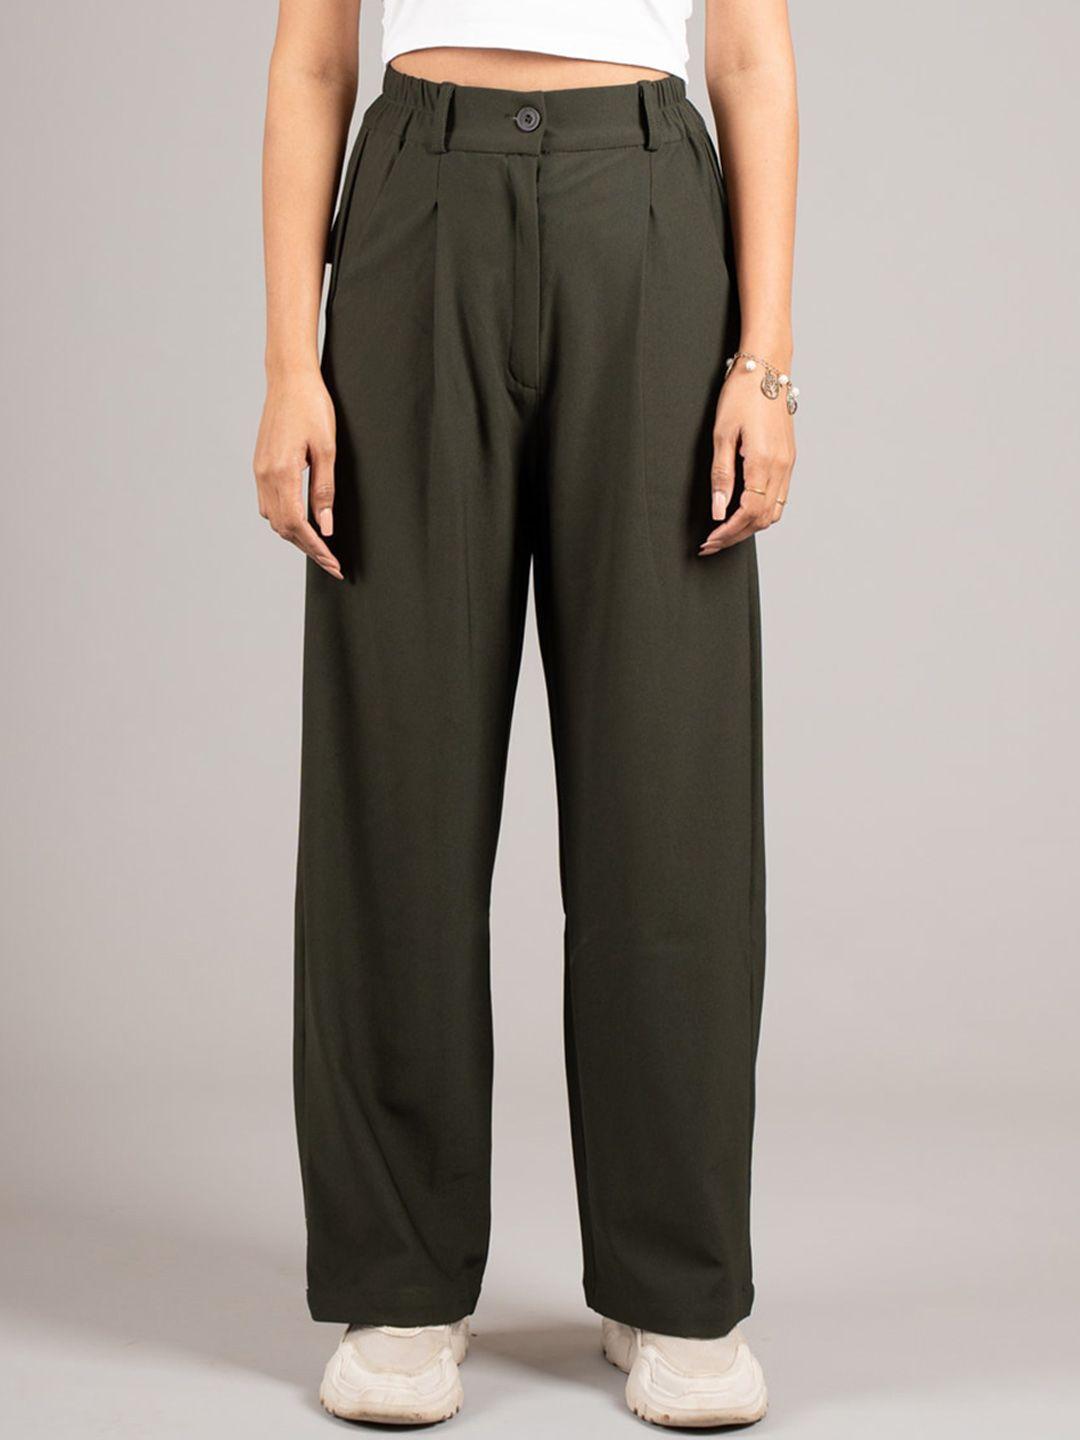 dressberry-women-olive-green-high-rise-pleated-parallel-trousers